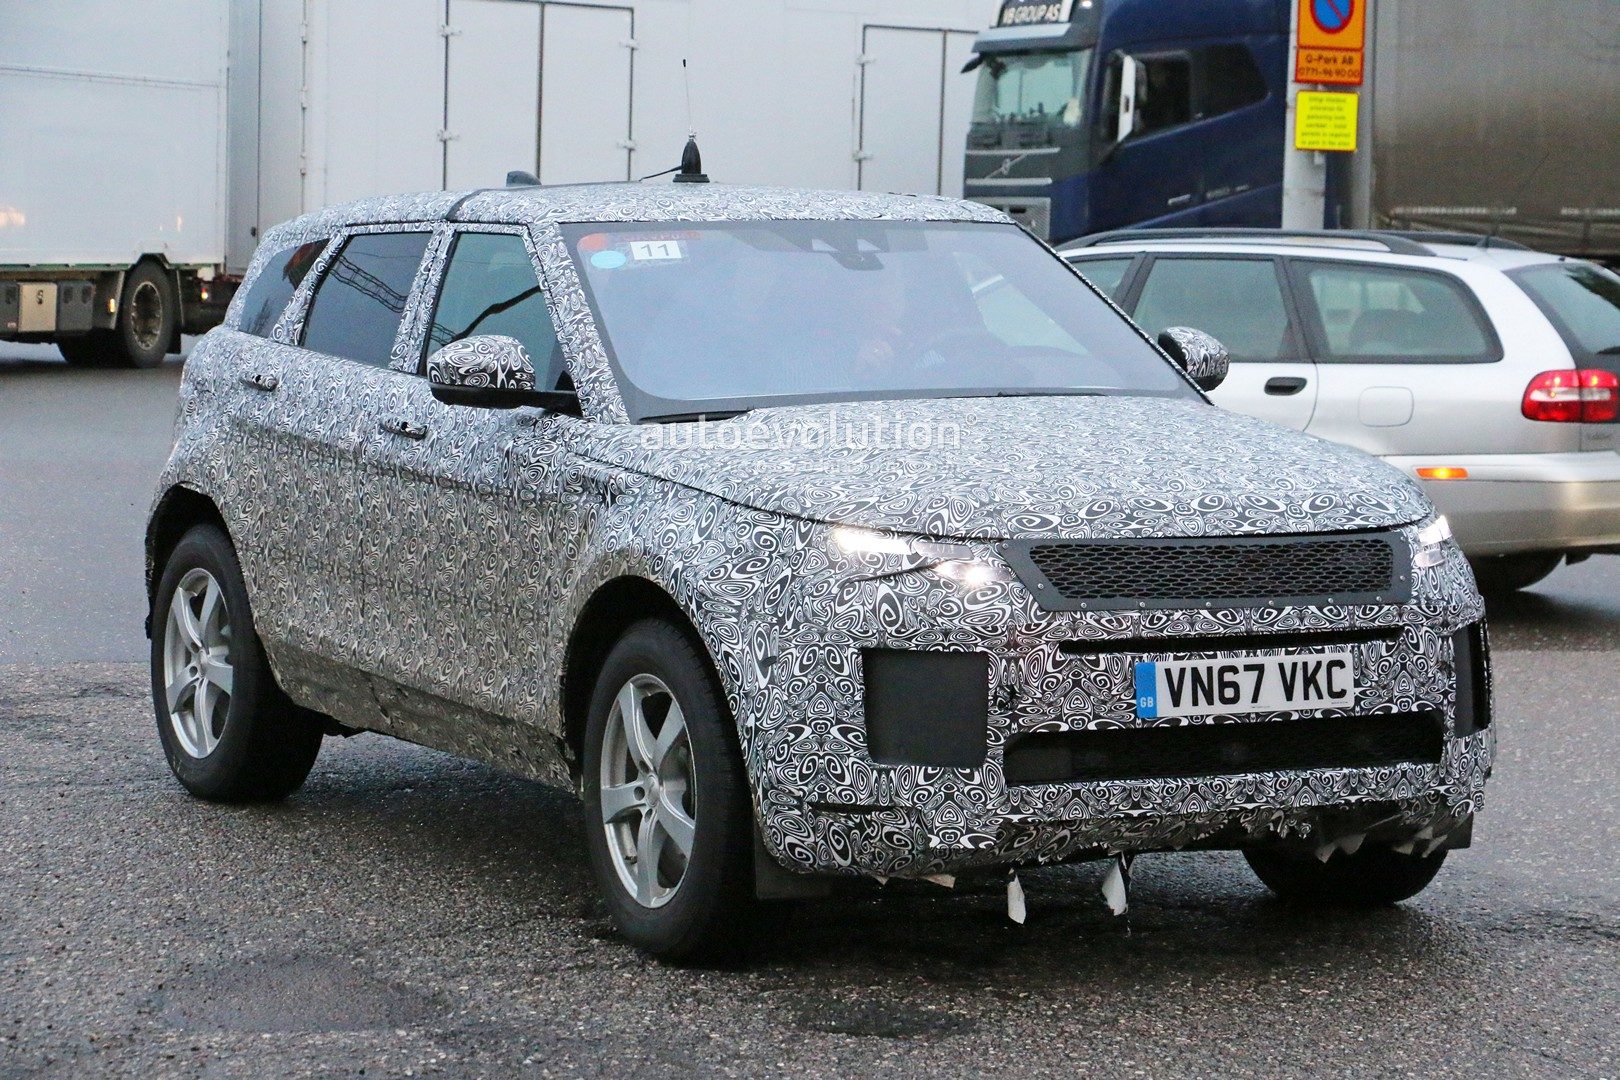 2019-range-rover-evoque-has-scraped-its-camo-most-likely-due-to-off-roading-122982_1.jpg